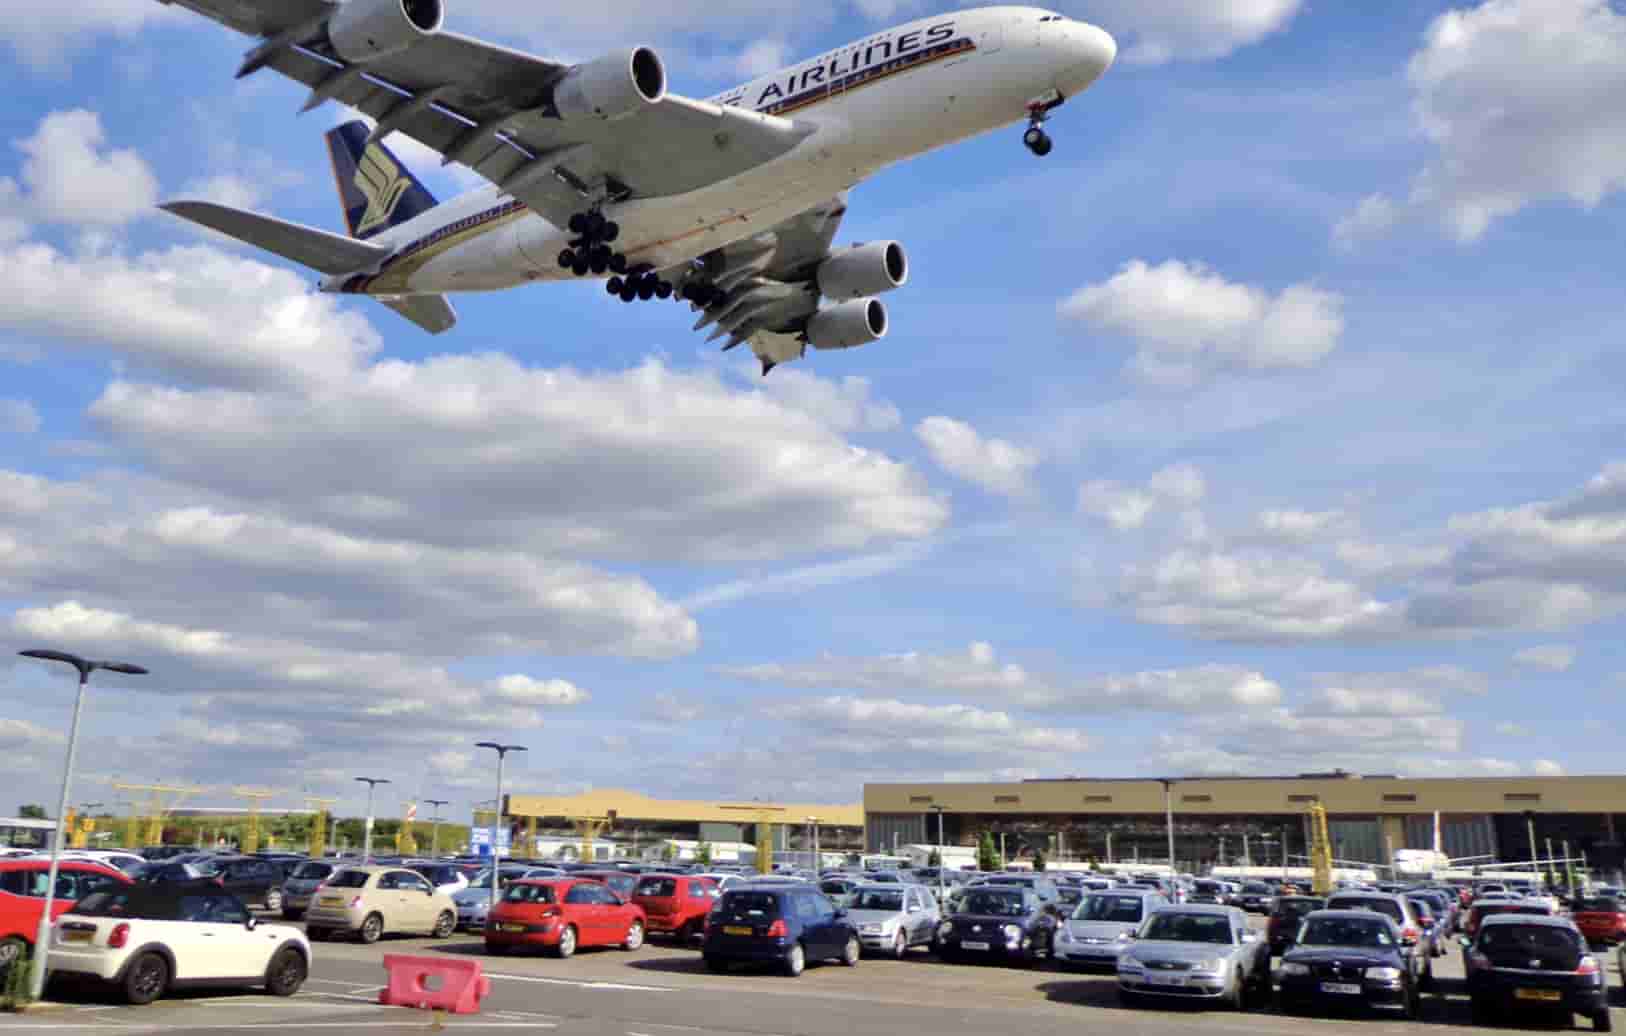 Short-Term Parking at the Airport